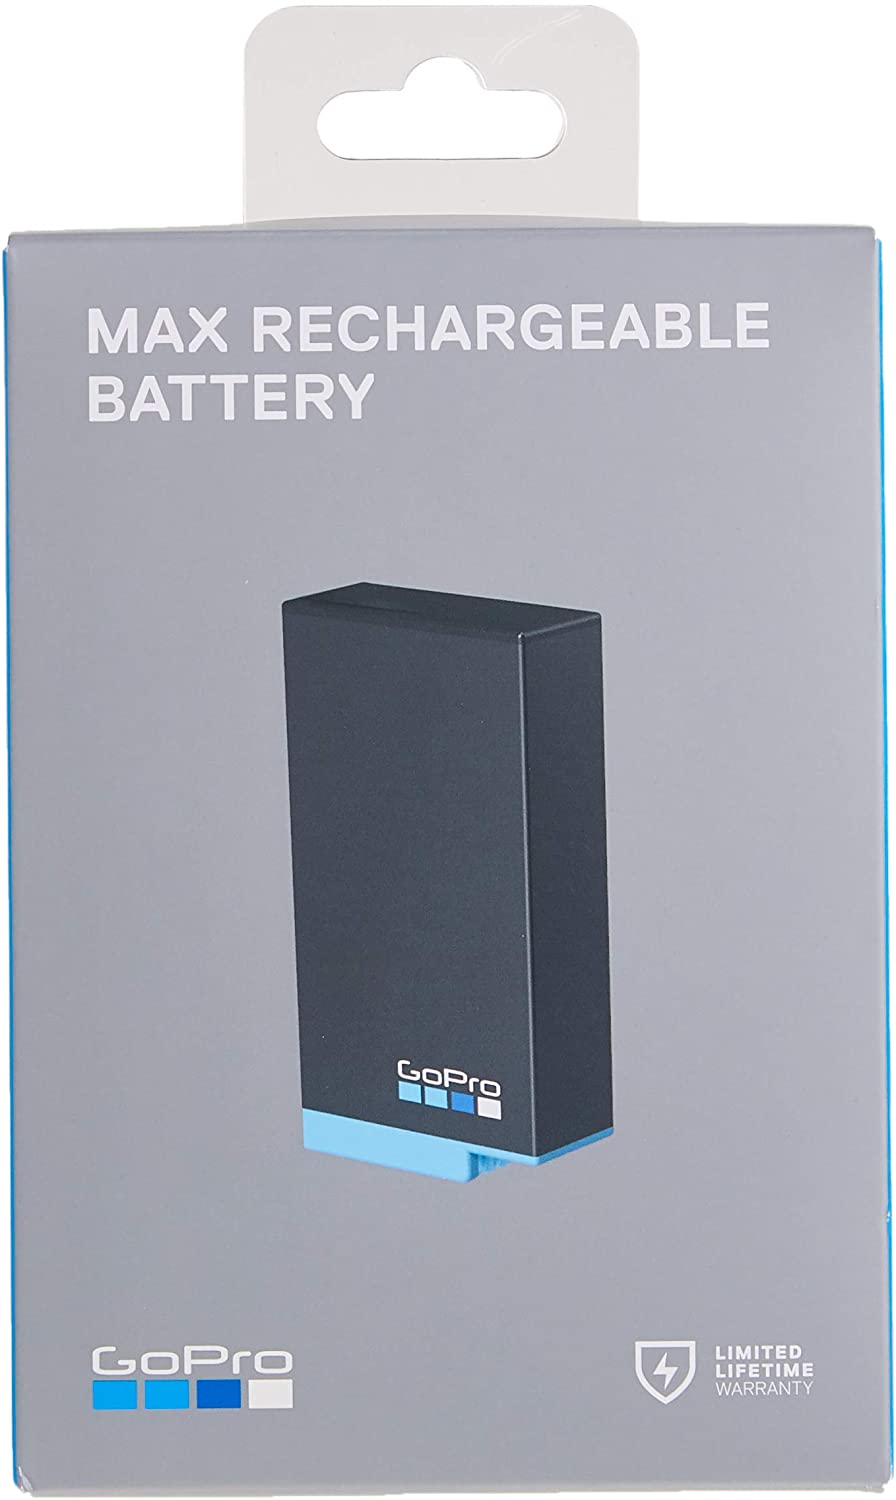 GoPro Rechargeable Battery (MAX)